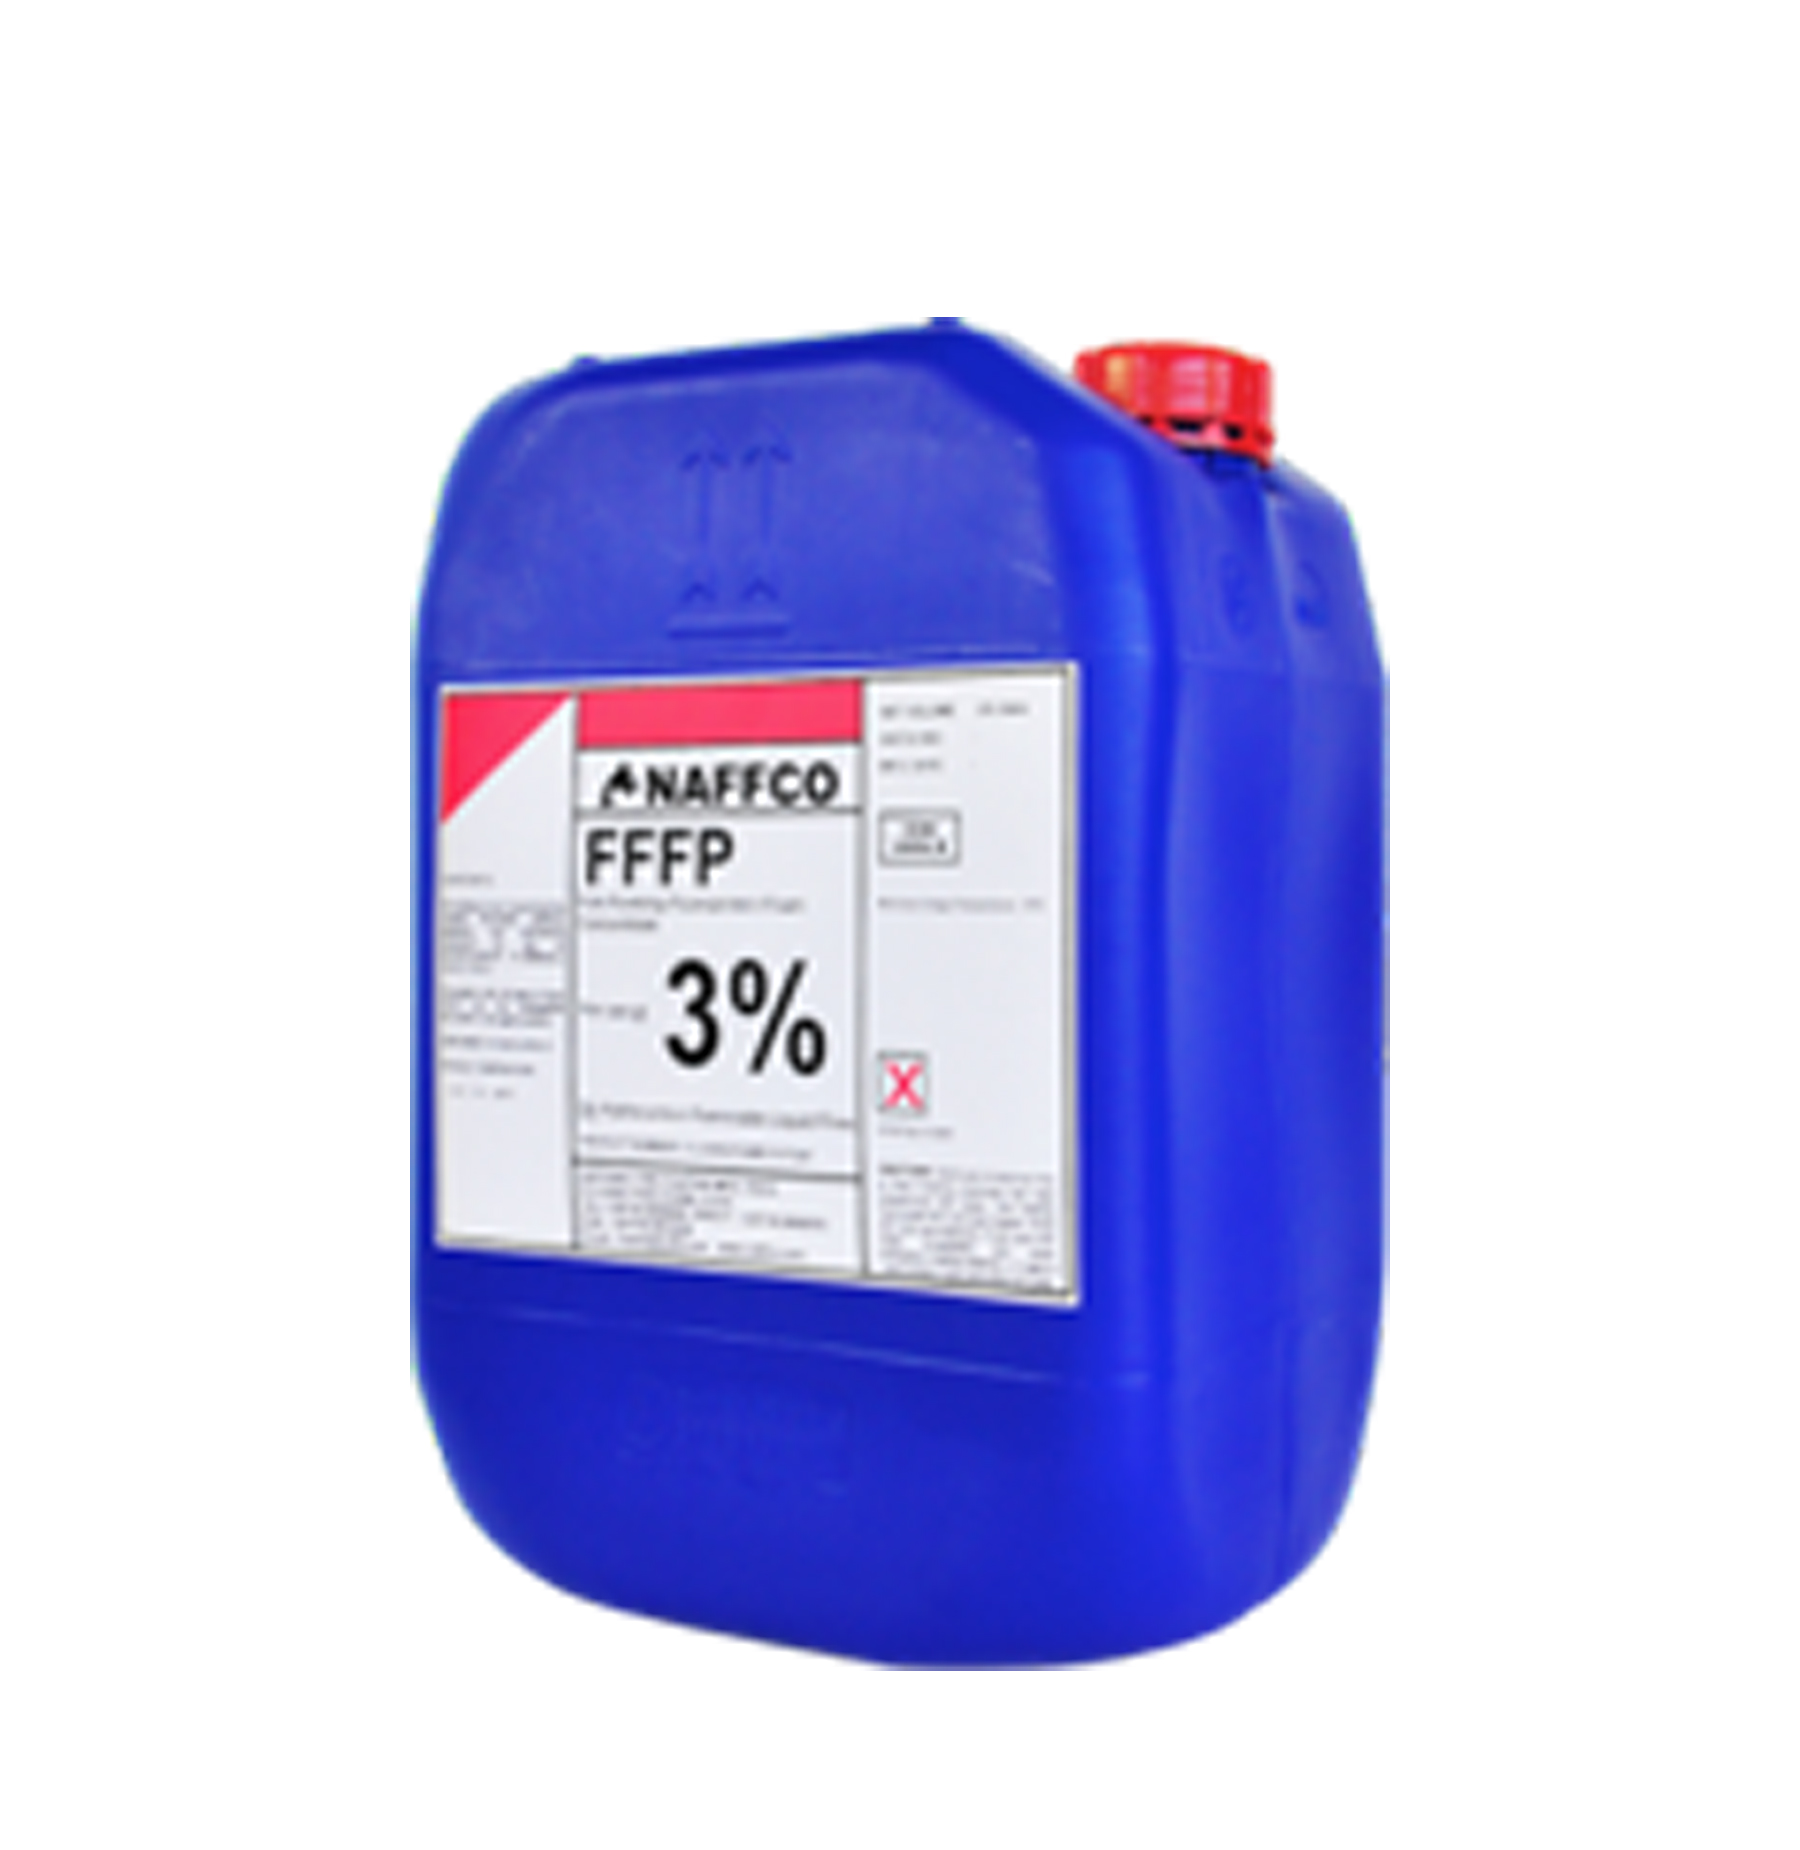 Film Forming Fluoroprotein Foam (FFFP) Concentrate